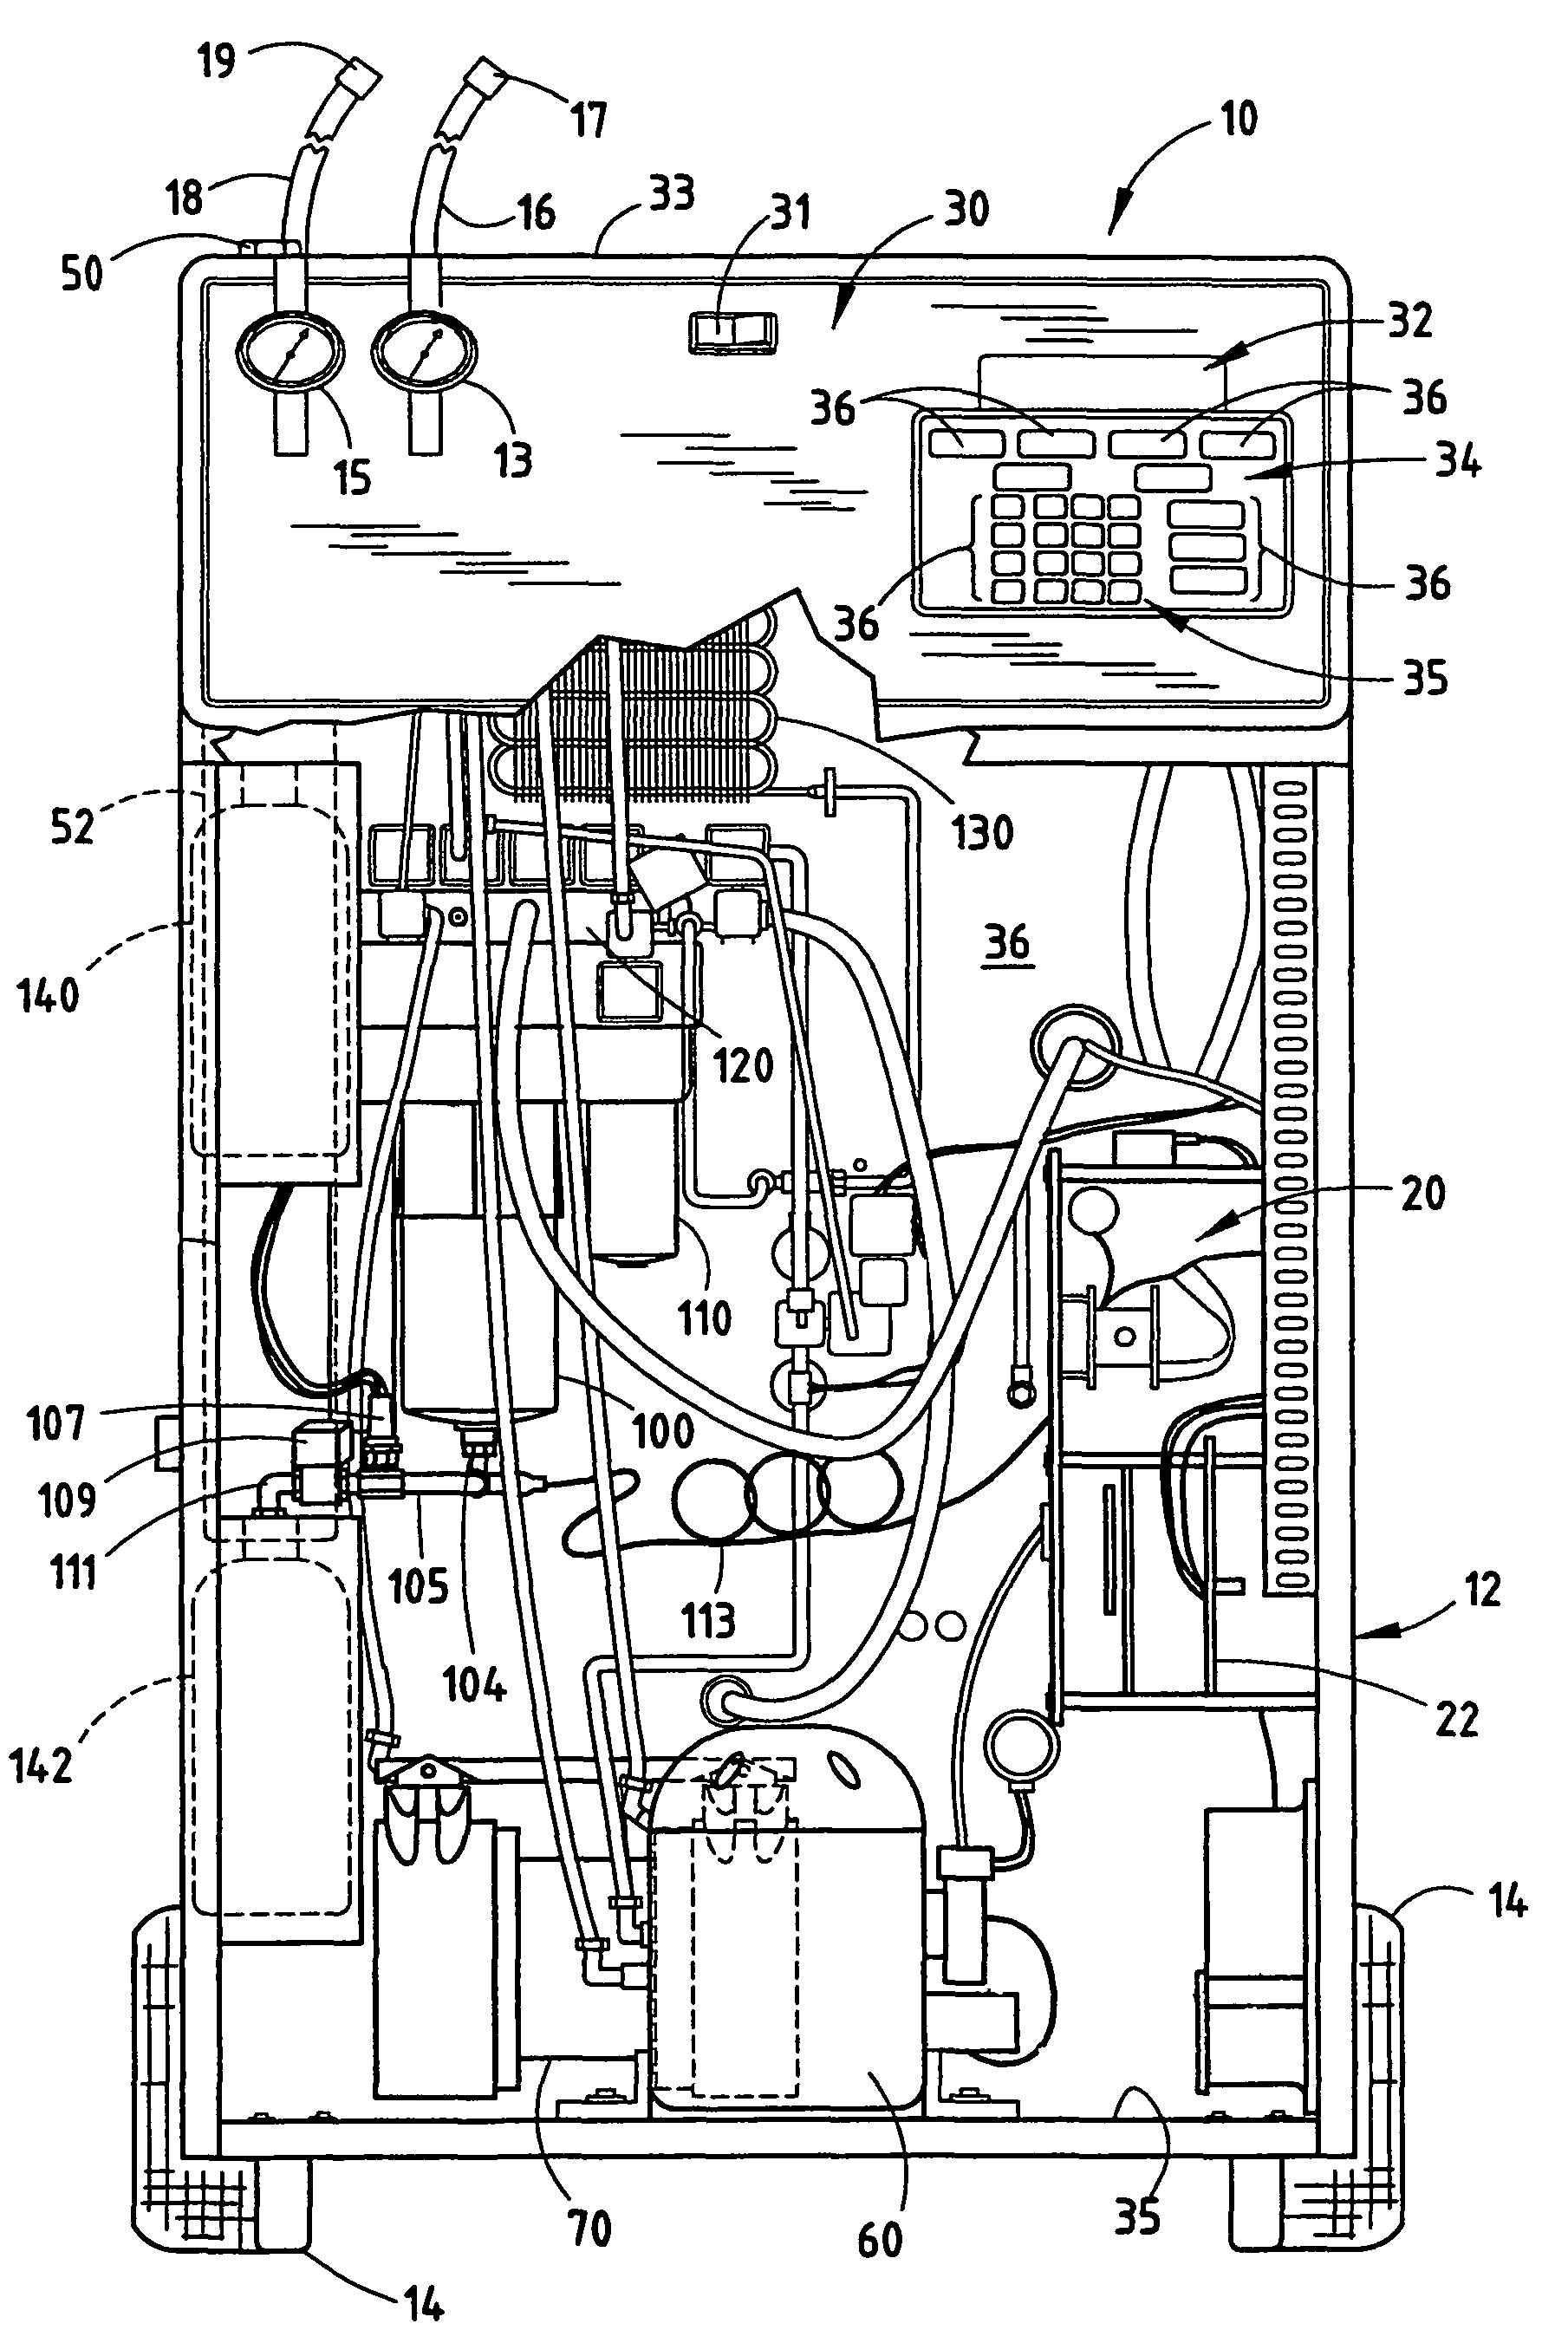 Internal clearing function for a refrigerant recovery/recharge machine